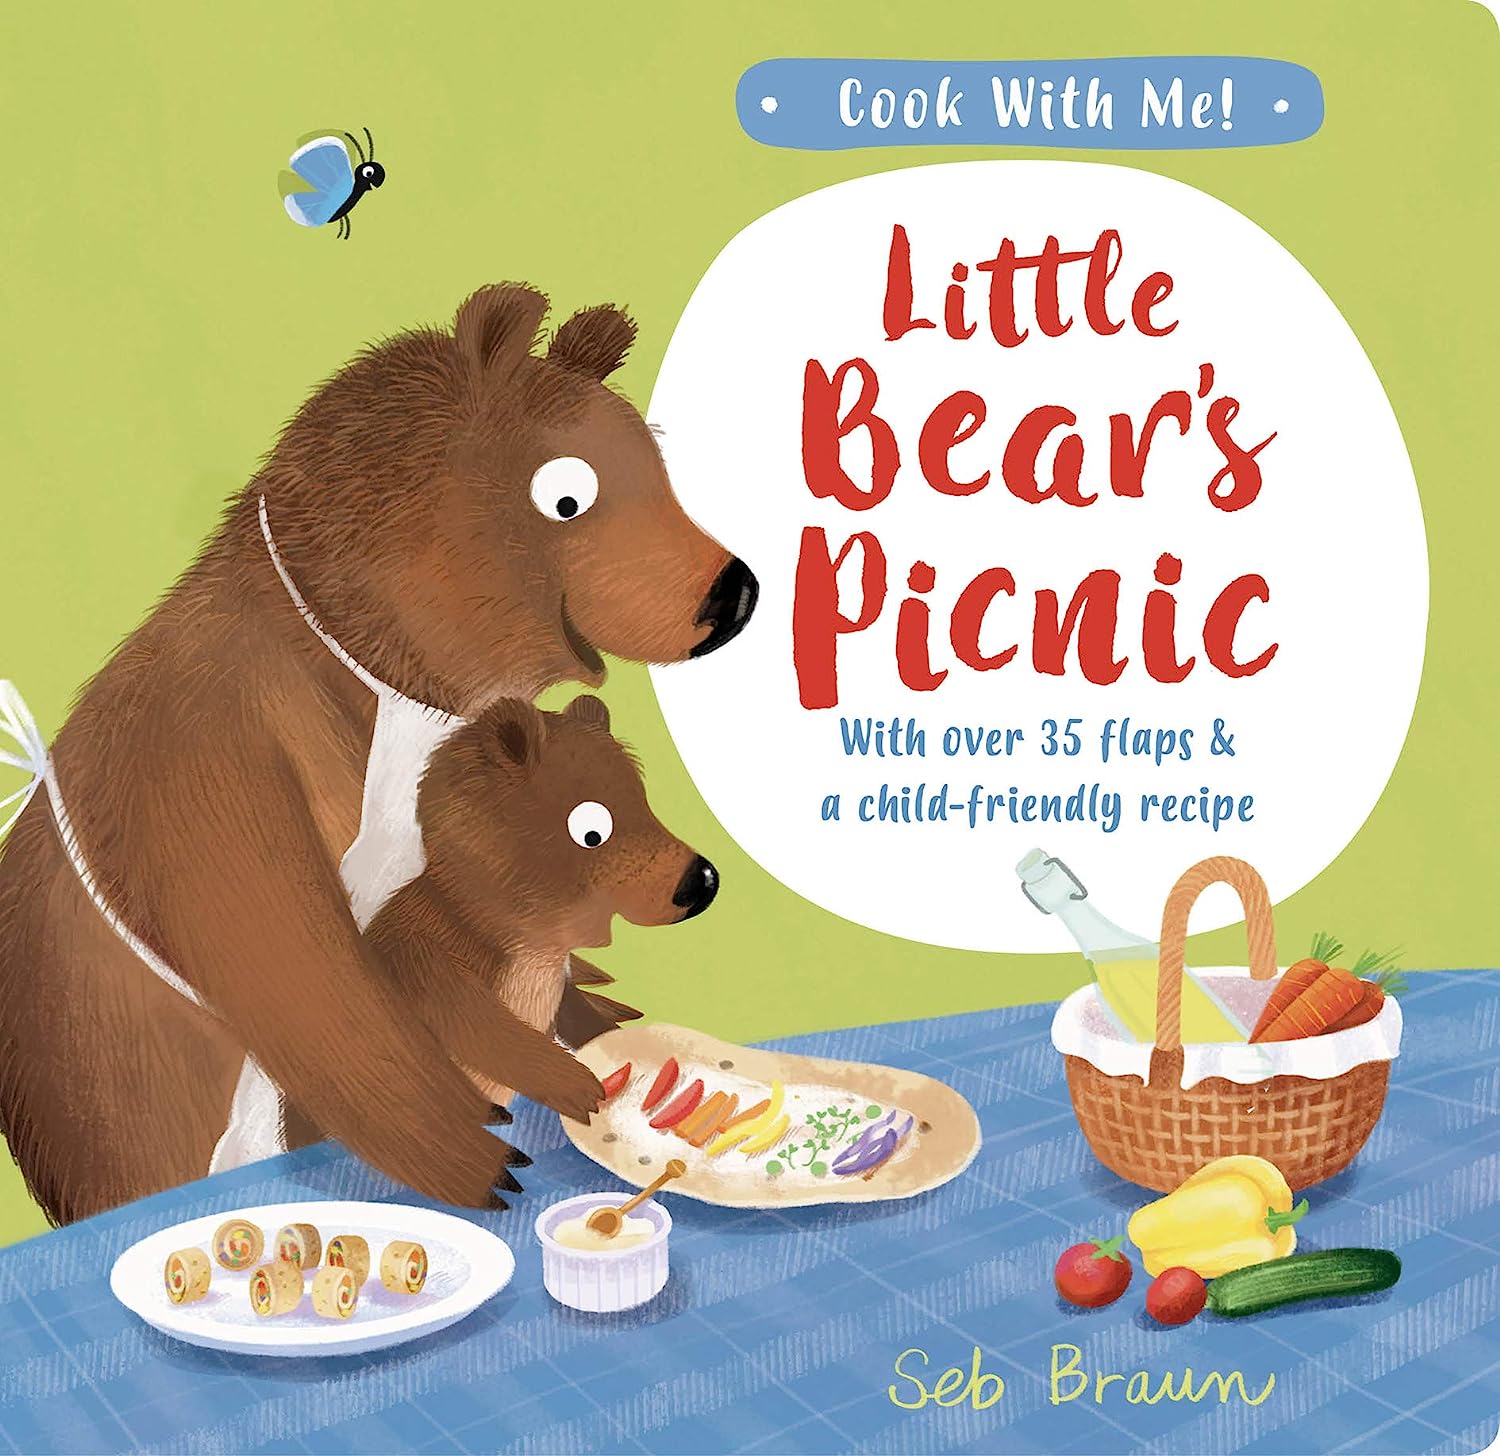 Little Bear's Picnic - Cook With Me